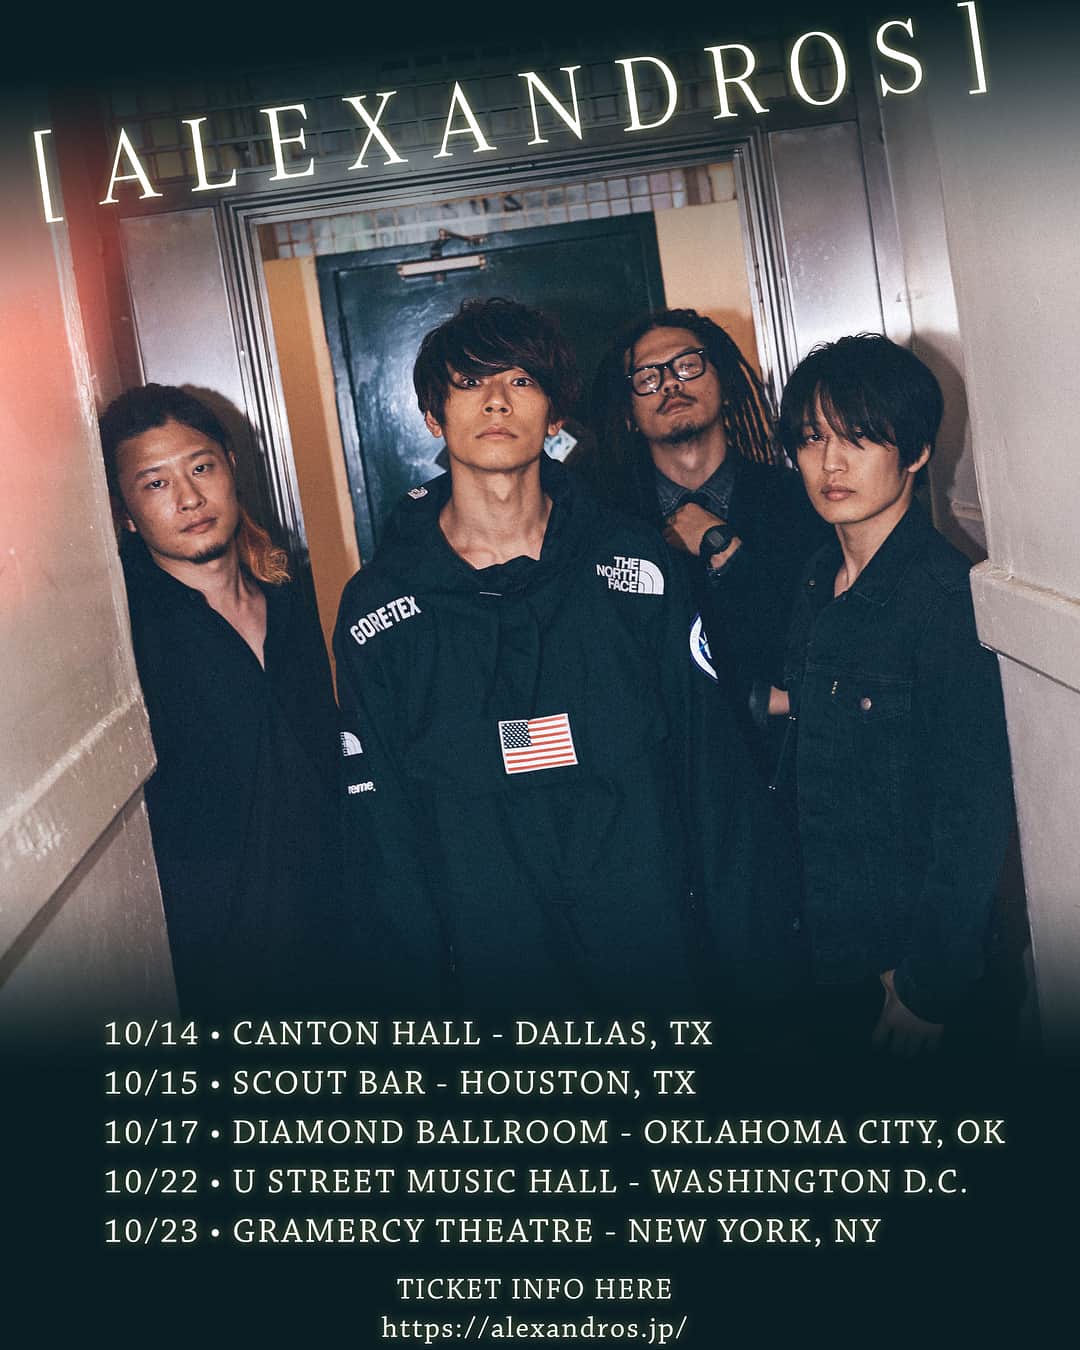 [ALEXANDROS]さんのインスタグラム写真 - ([ALEXANDROS]Instagram)「“Live in Kuala Lumpur 2018” & “USA TOUR 2018” confirmed! “Live in Kuala Lumpur 2018” on 9/22 and “[ALEXANDROS] USA TOUR 2018” in Oct are confirmed.  ーーーーー [ALEXANDROS] Live in Kuala Lumpur 2018 Date : 9/22(Sat) Venue : KL LIVE Ticket price:  VIP RM438 (VIP package) = Priority entrance, Poster with autograph, fan meeting) RM268 / RM218 / RM138 Contact: info@toyboxprojects.com Website : www.toyboxprojects.com/alexandros-2018 ーーーーー [ALEXANDROS] USA TOUR 2018 10/14 Dallas, TX @ Canton Hall 10/15 Houston, TX @ Scout Bar 10/17 Oklahoma City, OK @ Diamond Ballroom 10/22 Washington D.C. @ U Street Music Hall 10/23 New York, NY @ Gramercy Theatre  Ticket ON SALE 8/15 9AM (PST)  #usa #kualalumpur #tour #alexandros」8月9日 1時09分 - alexandros_official_insta